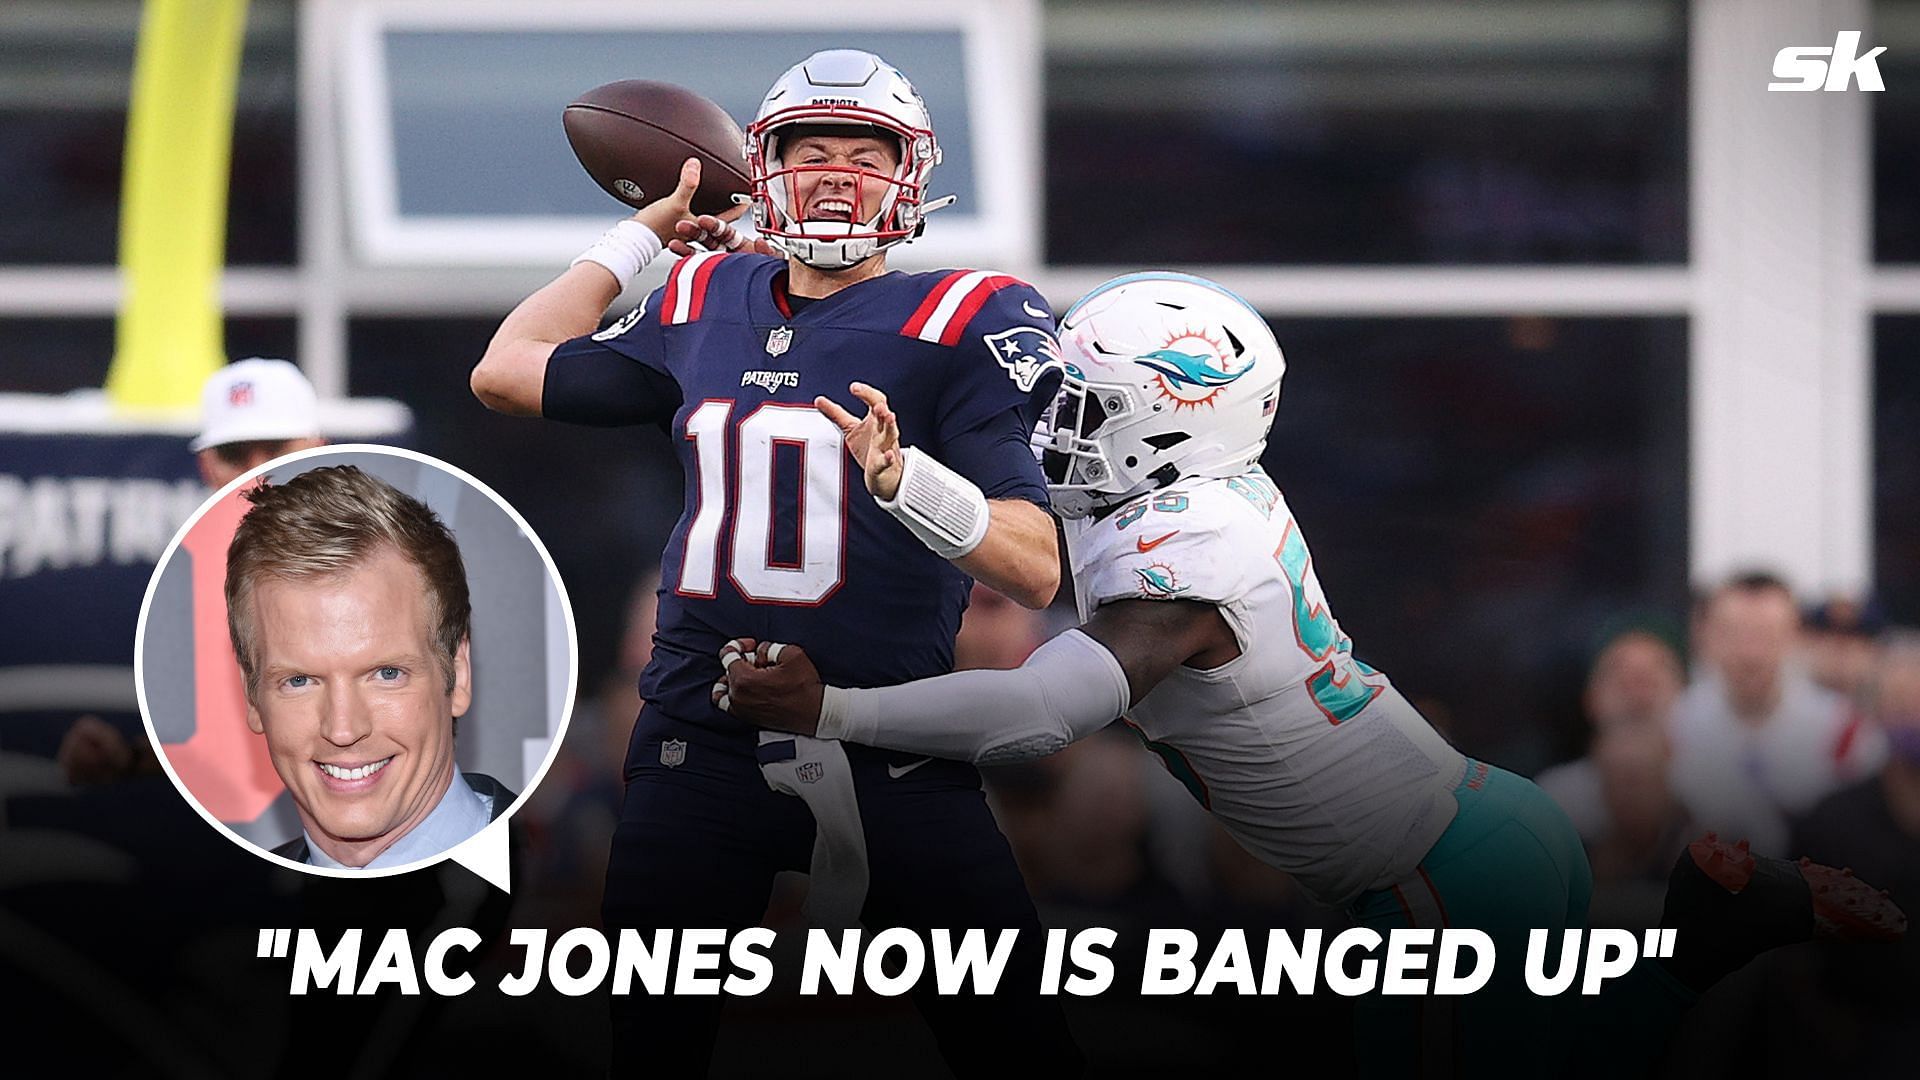 Chris Simms (inset) is worried about the Patriots offense after game against Dolphins